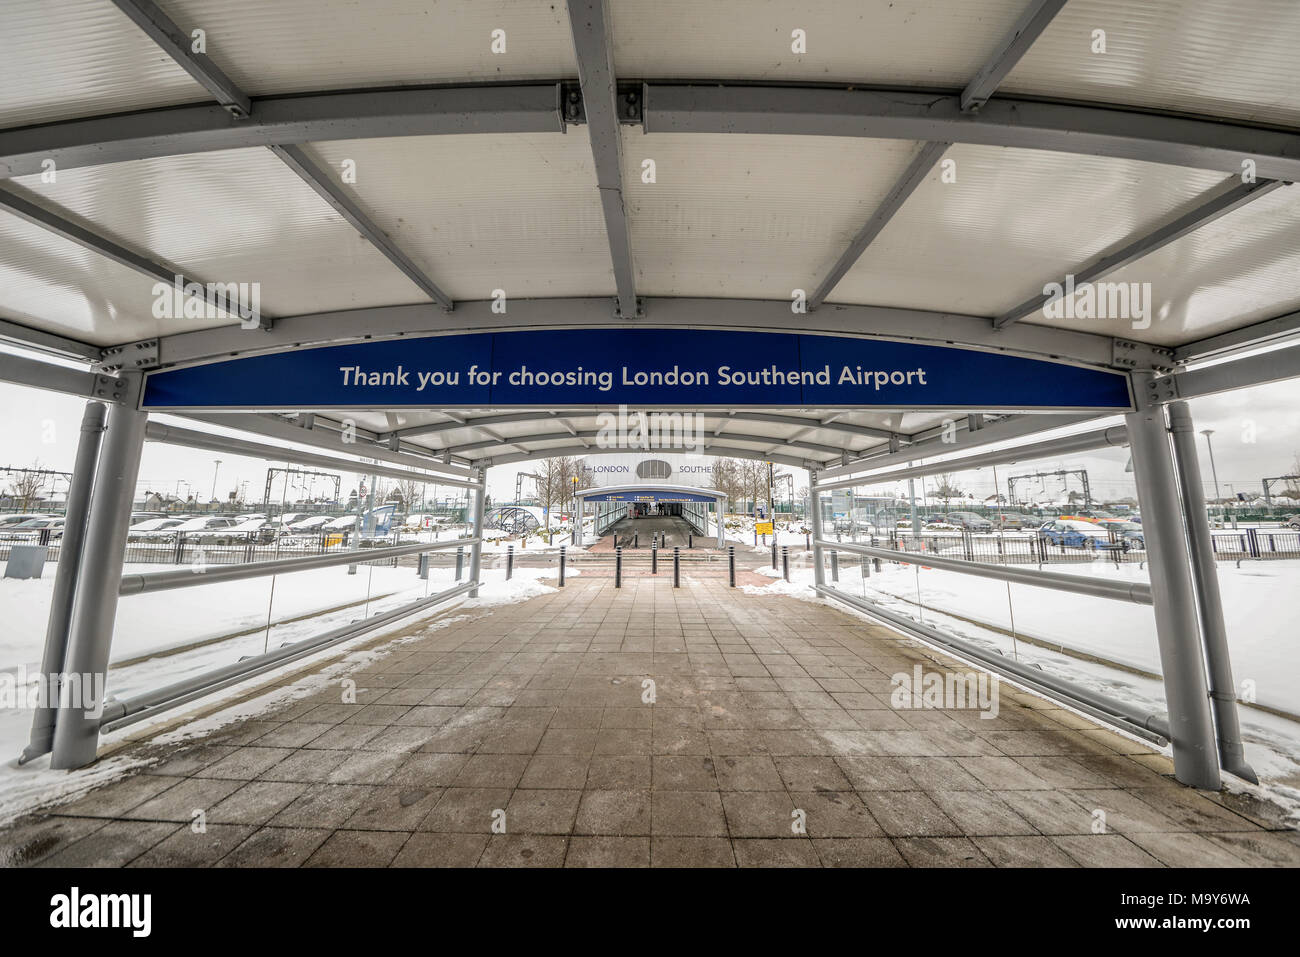 Covered walkway to London Southend Airport railway station from the airport terminal. Snow on the ground Stock Photo